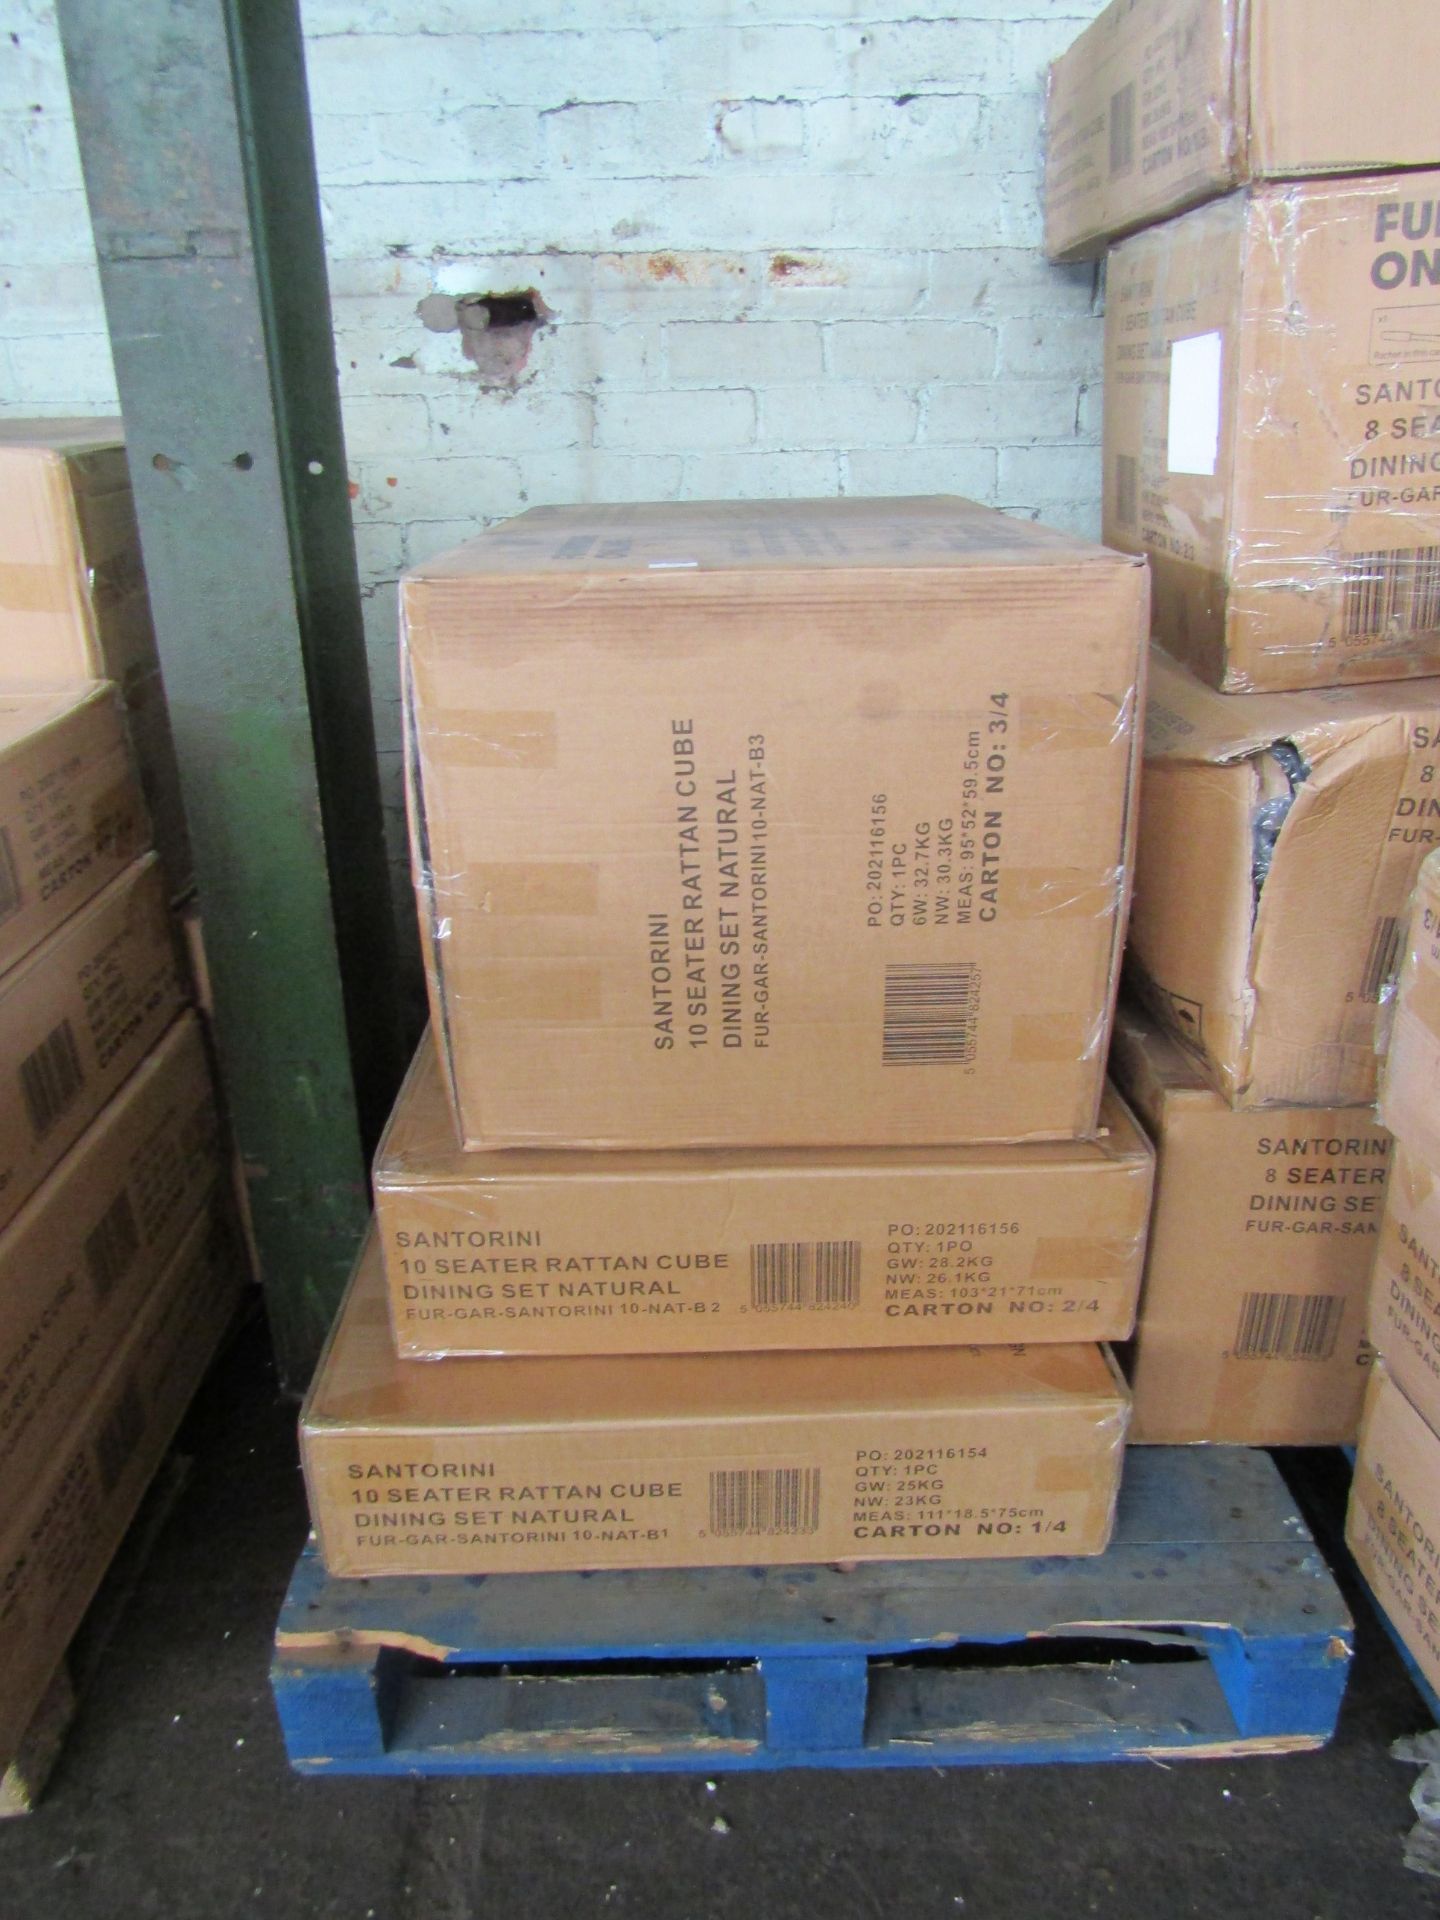 3 x boxes of Furniture Online Ex-Retail Customer Returns Mixed Lot - Total RRP est. 1124.25 This lot - Image 2 of 2